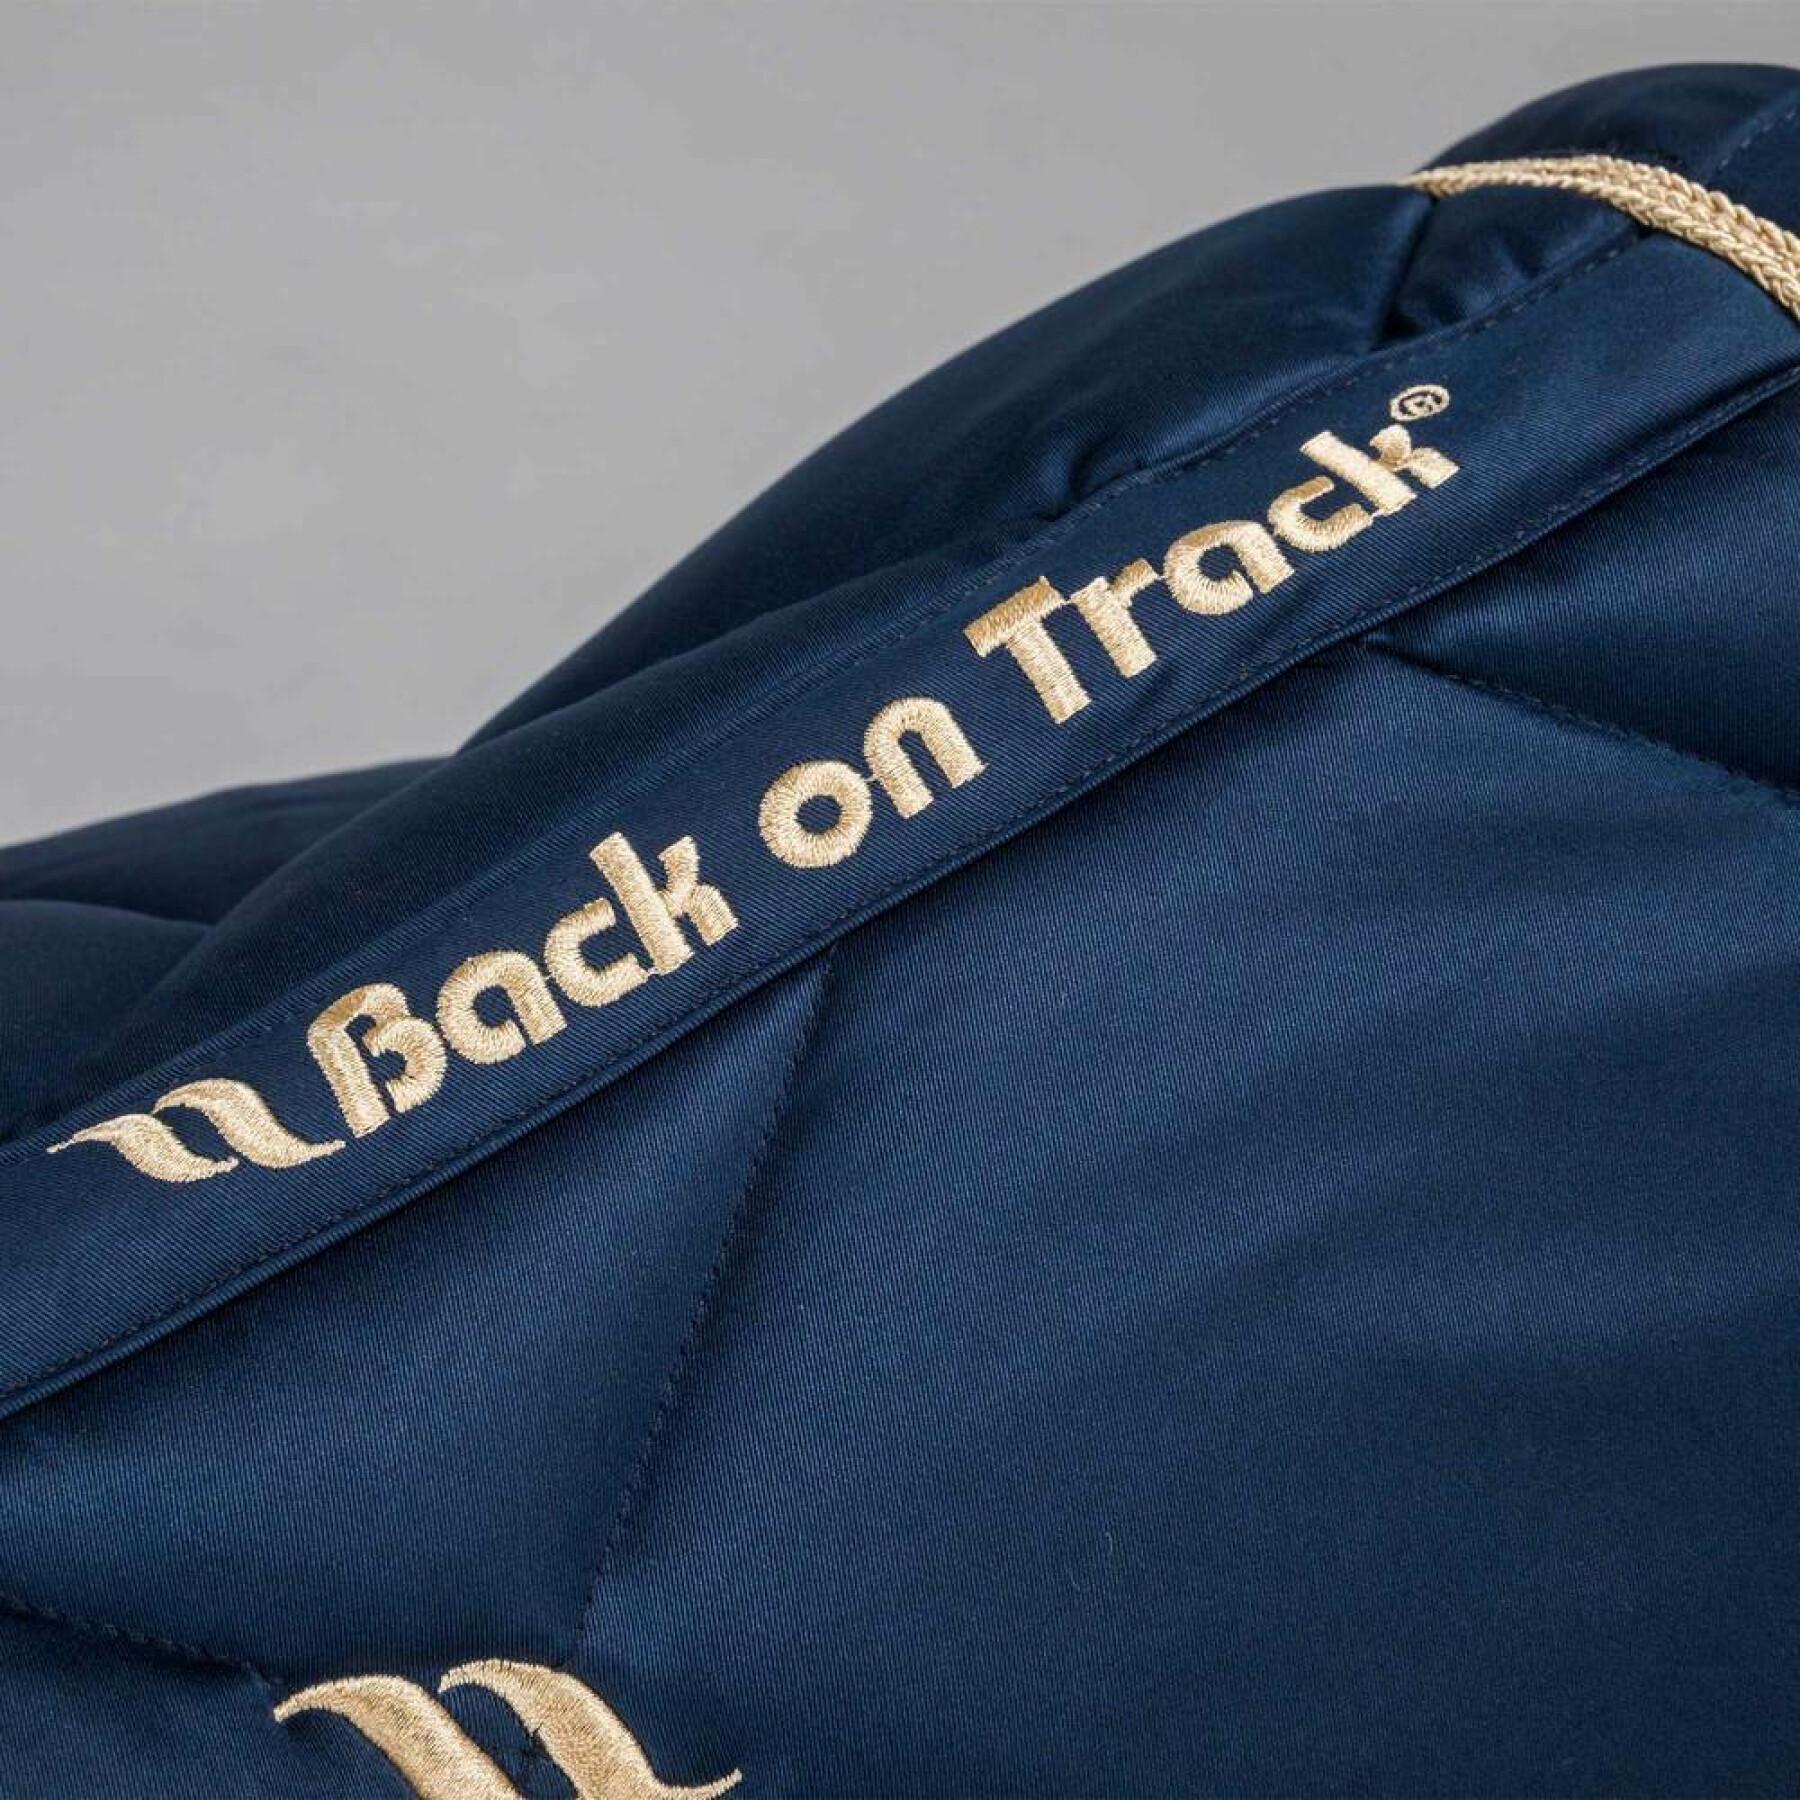 Tapete de adestramento Back on Track night collection